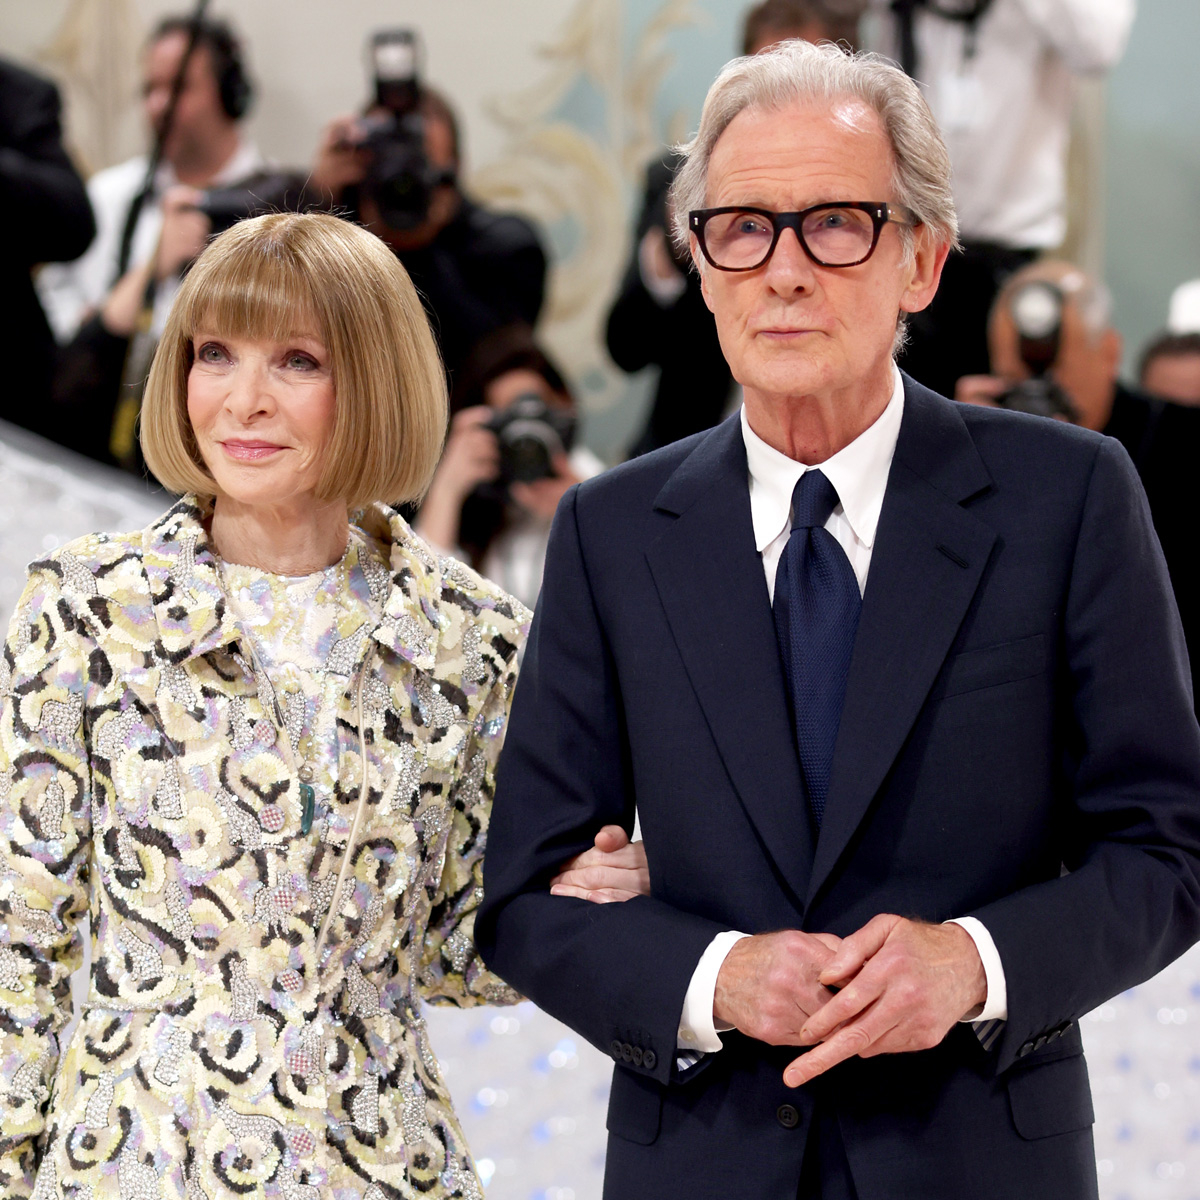 The Truth About Anna Wintour & Bill Nighy's Met Gala 2023 Appearance